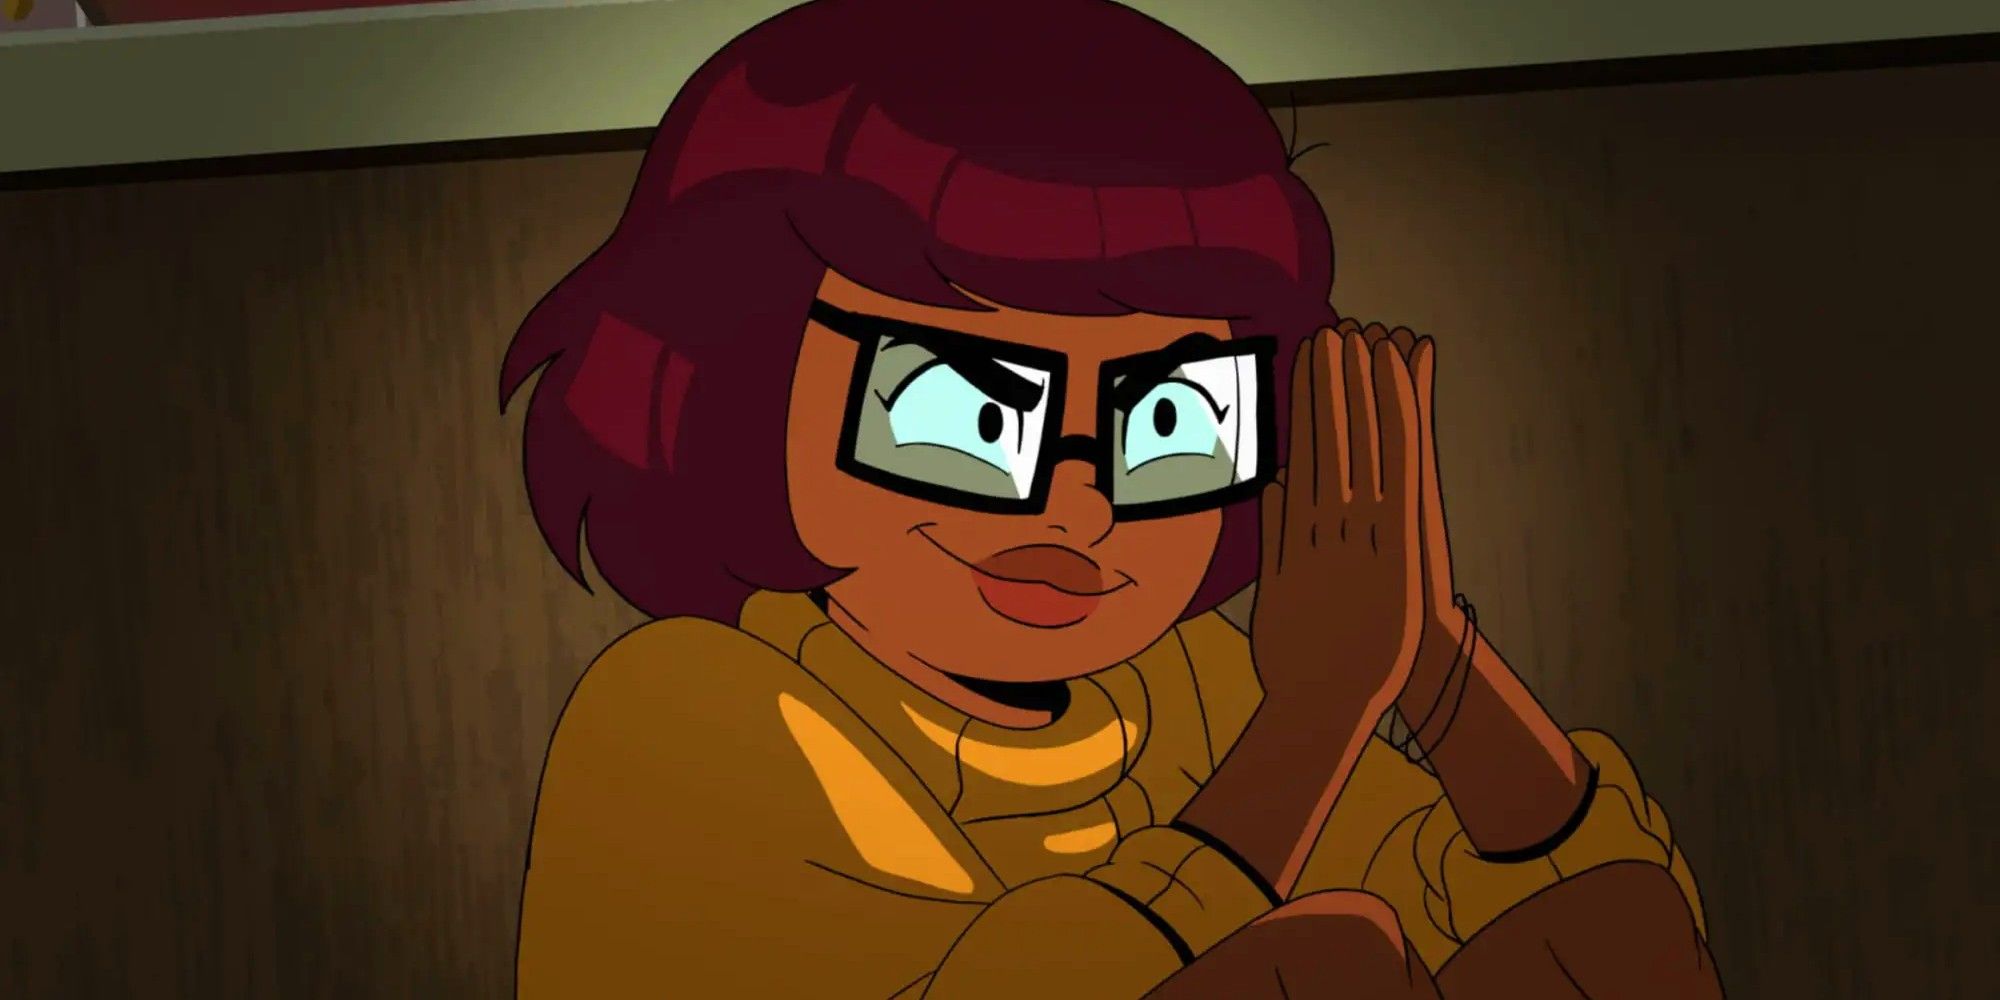 HBO's Velma pressing her hands together and looking like she's scheming